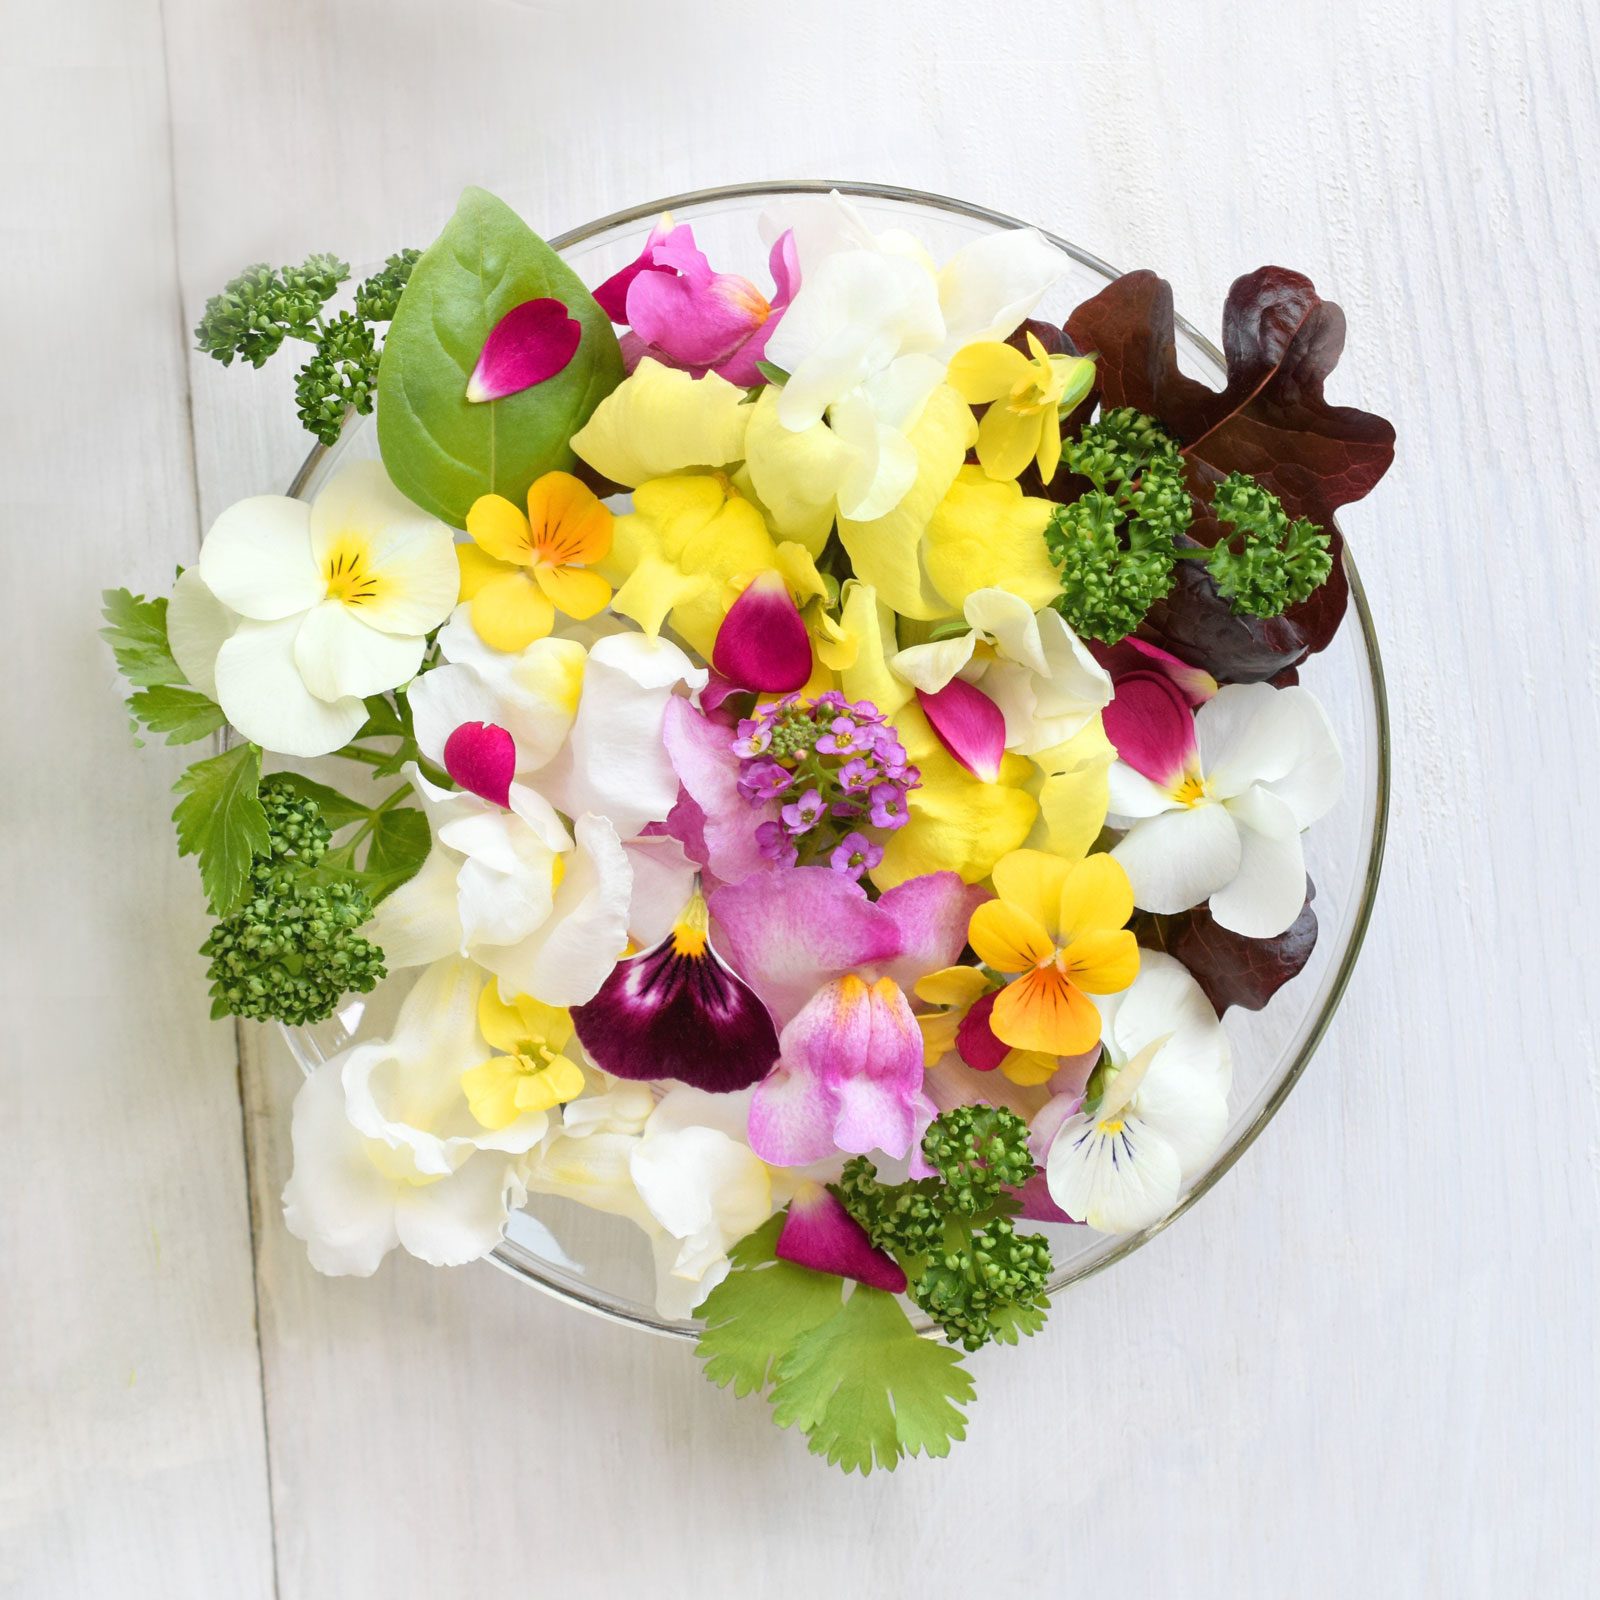 Edible Flowers List For Use in Cooking and Garnishing